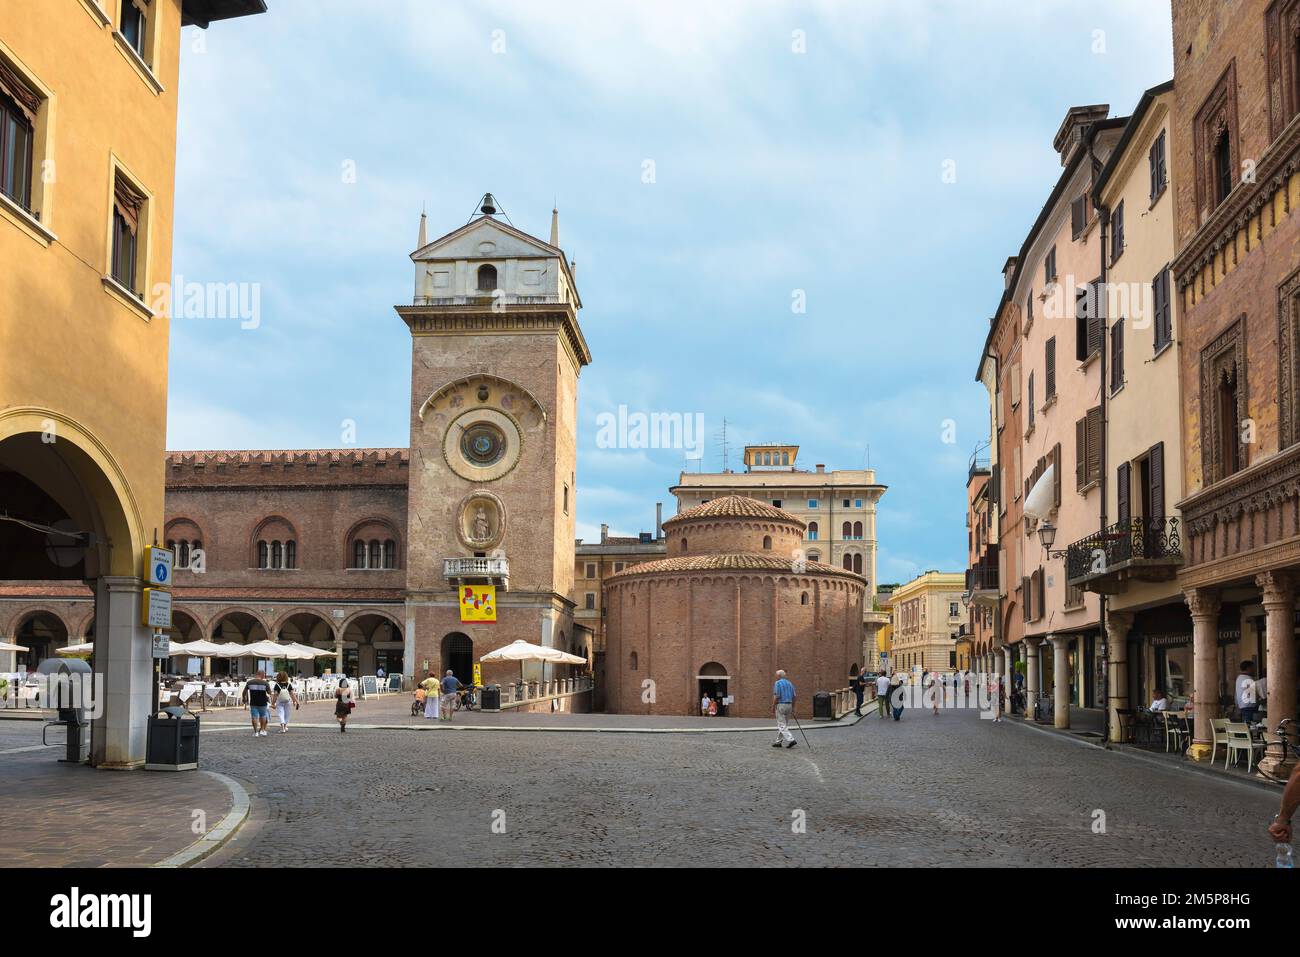 Mantua Italy, view in summer of the Piazza delle Erbe surrounded by Renaissance buildings in the scenic center of the city of Mantua, Lombardy, Italy Stock Photo